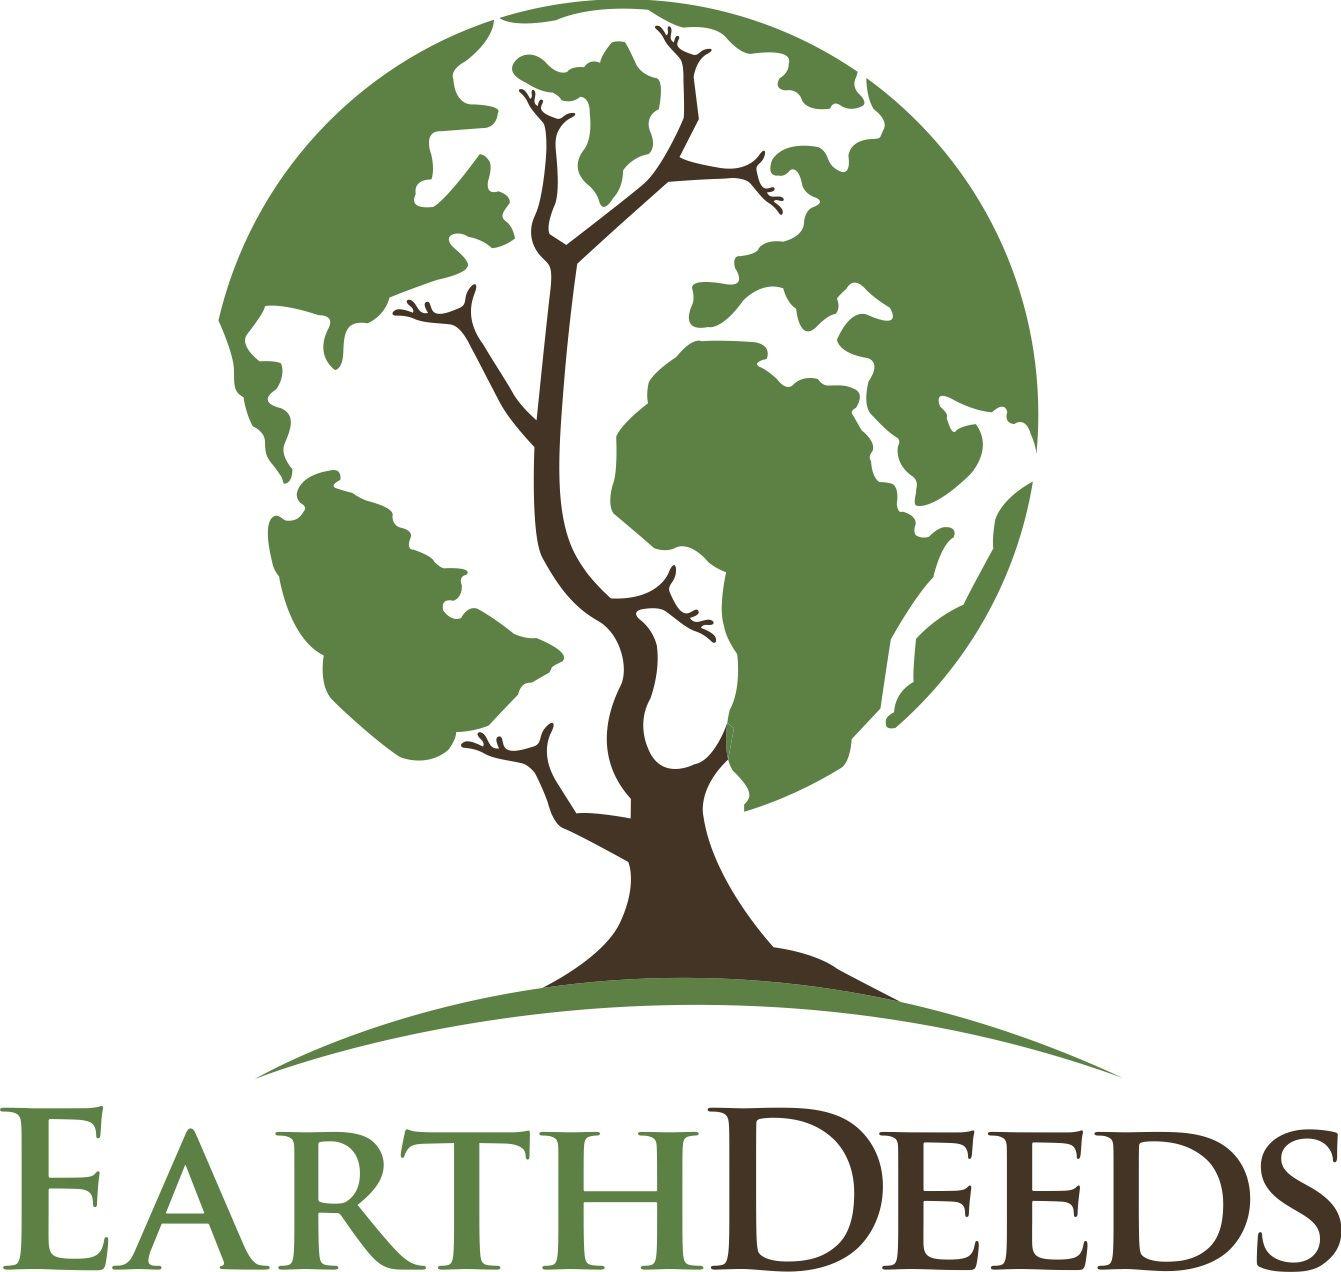 Global Earth Logo - Earth Deeds : Our Vision